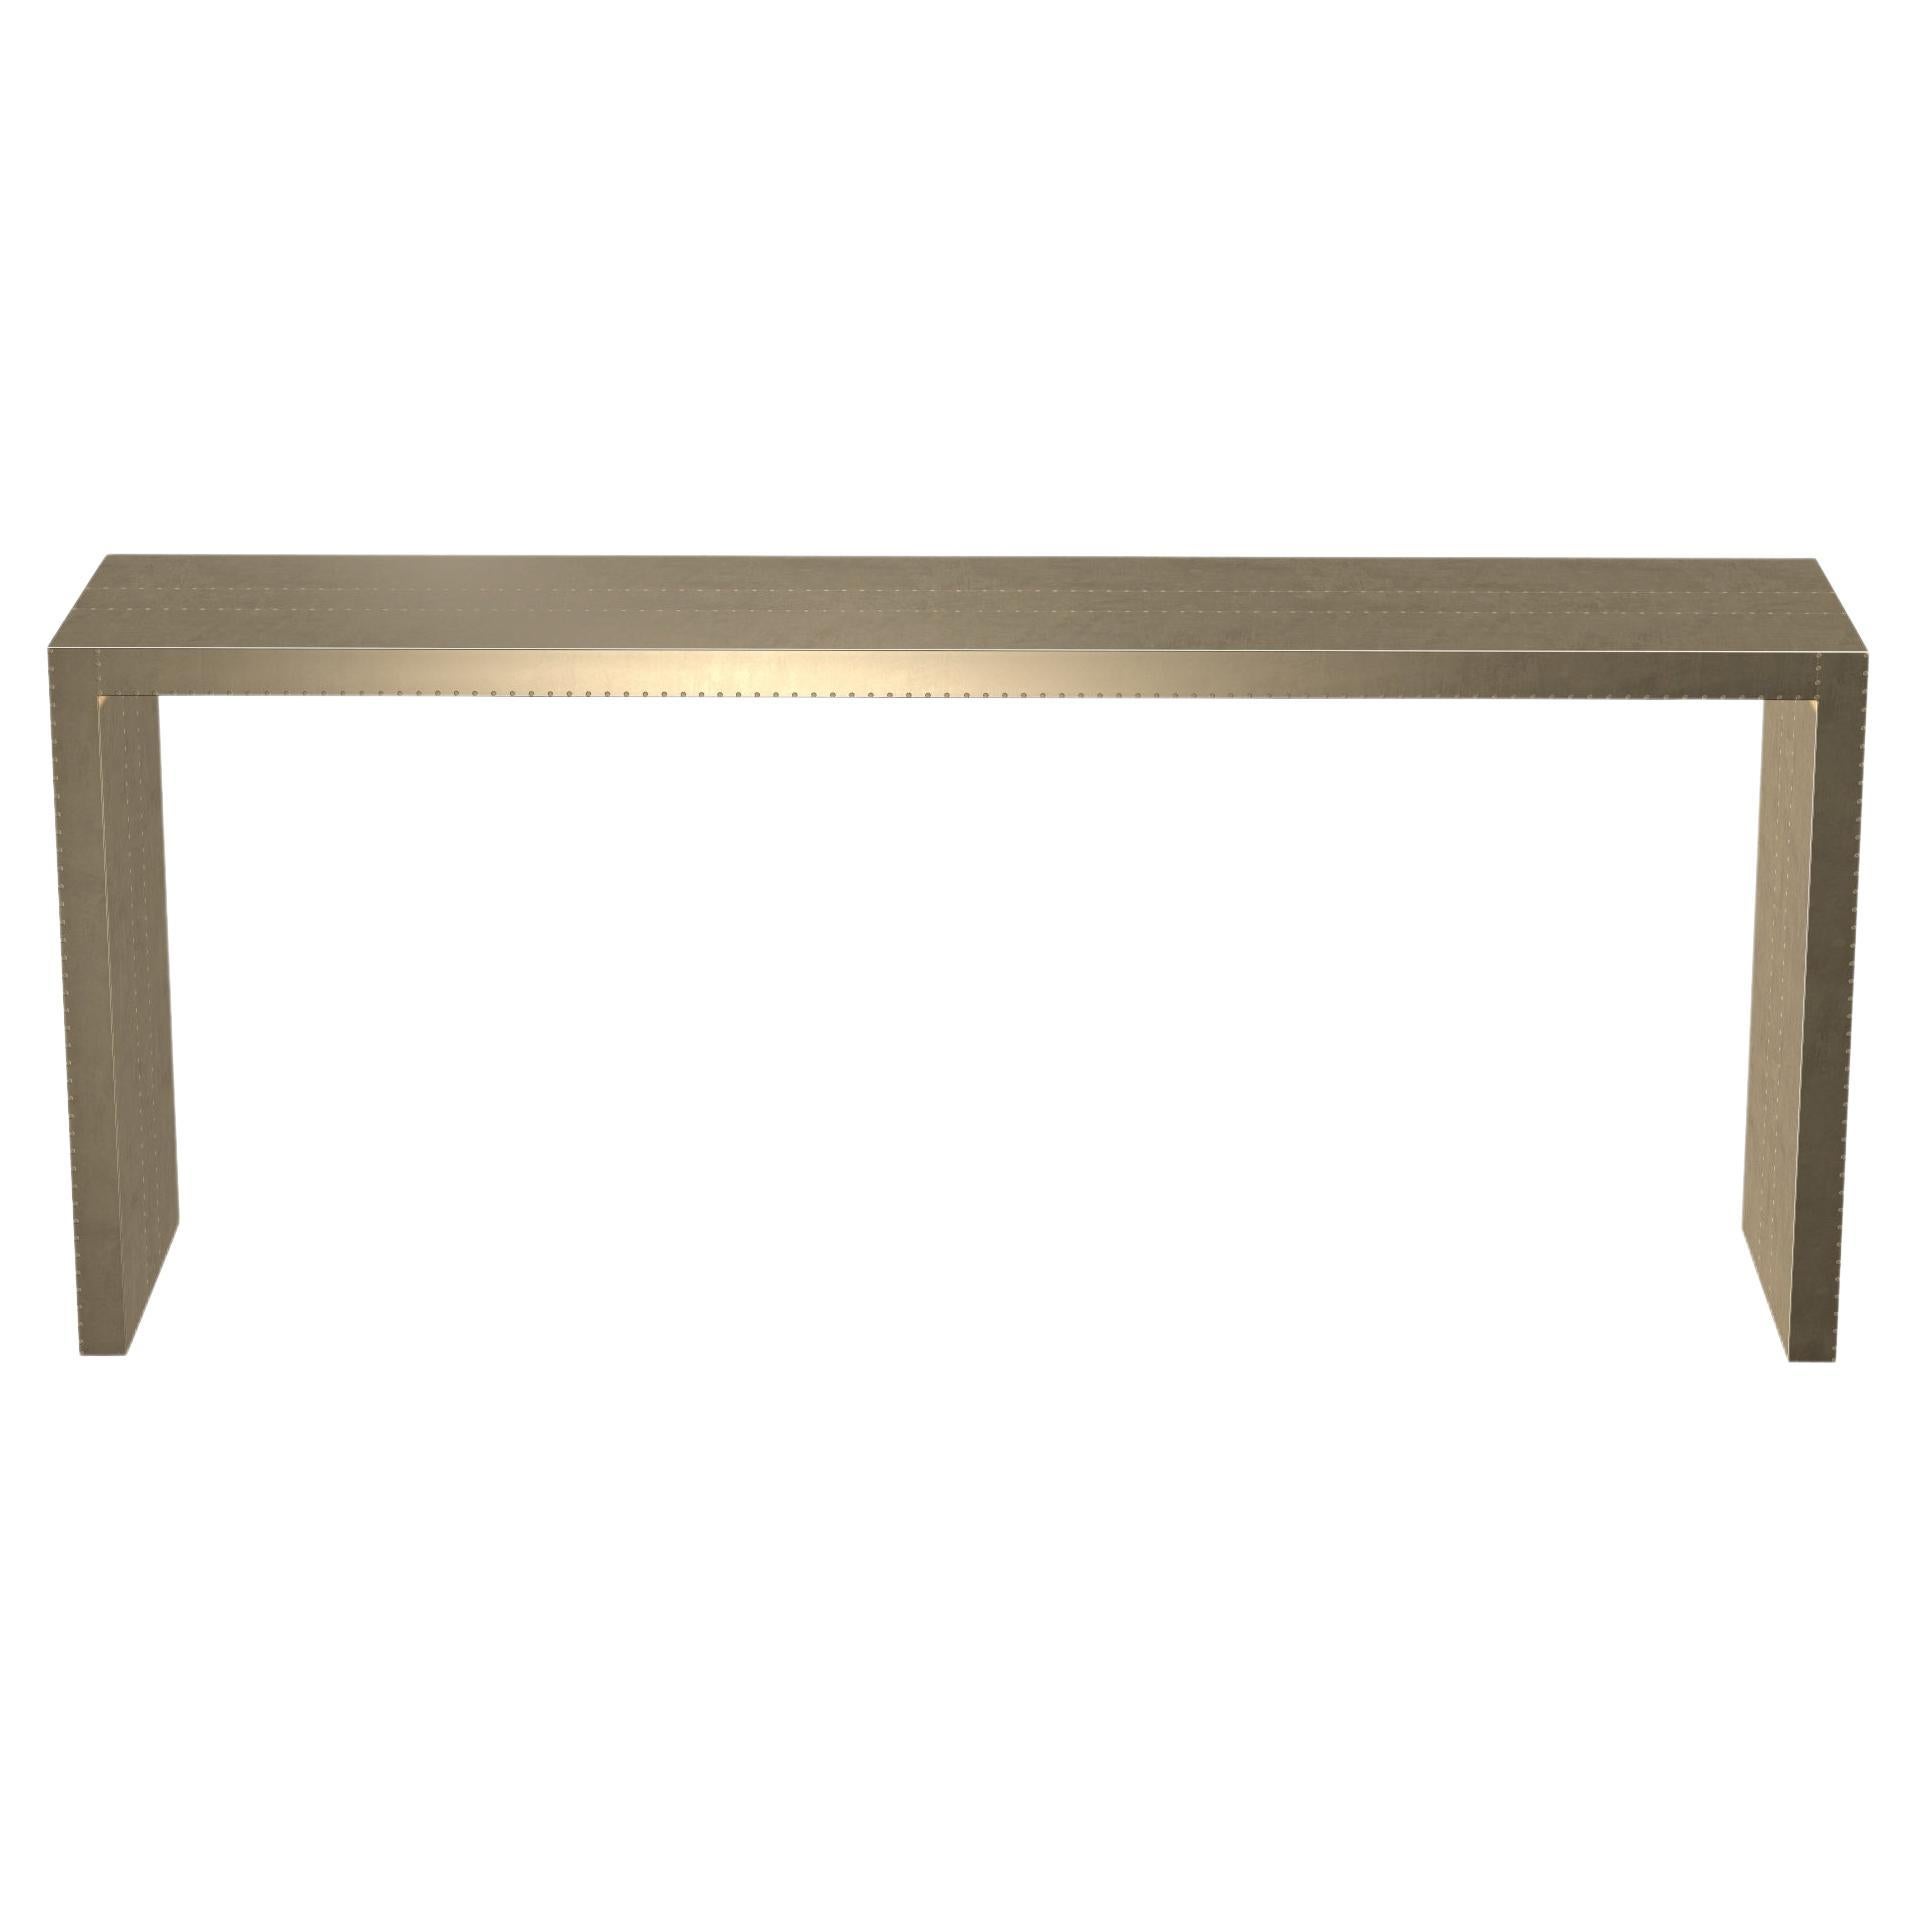 Art Deco Card Tables and Tea Tables Rectangular Console in Smooth Brass 